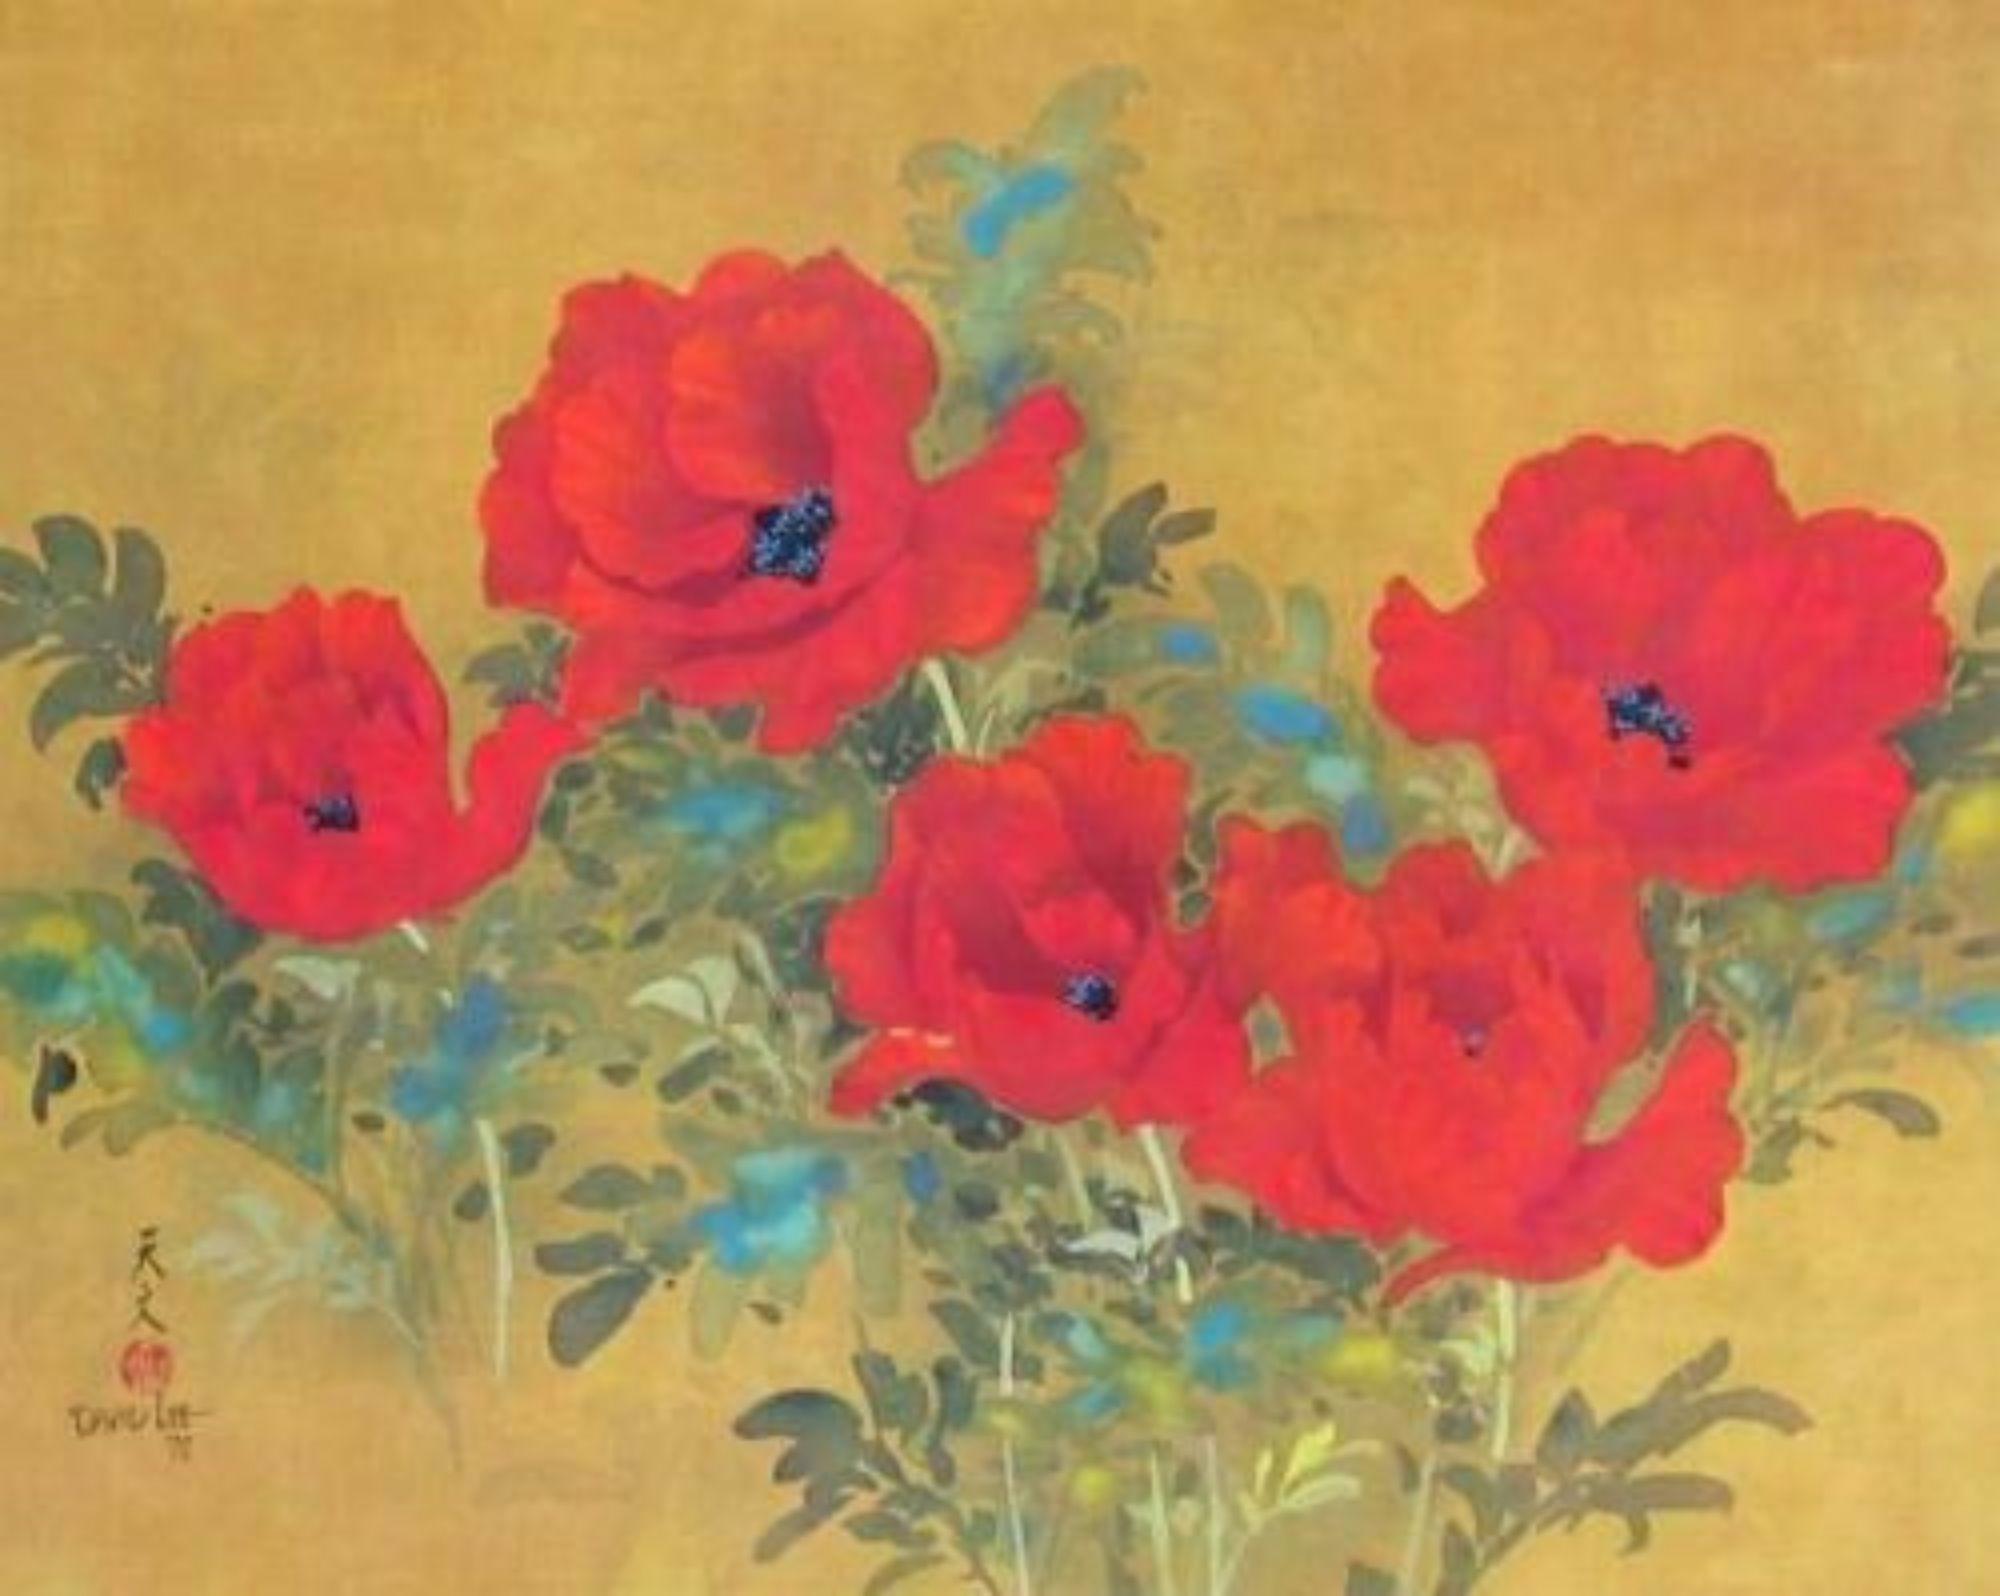 DAVID LEE (1944-  ) David Lee was the youngest ever to win the prestigious Chinese National Painting Competition. Soon after completing his college studies, he moved to Hawaii where he devoted himself to his artwork full-time. Lee has had numerous